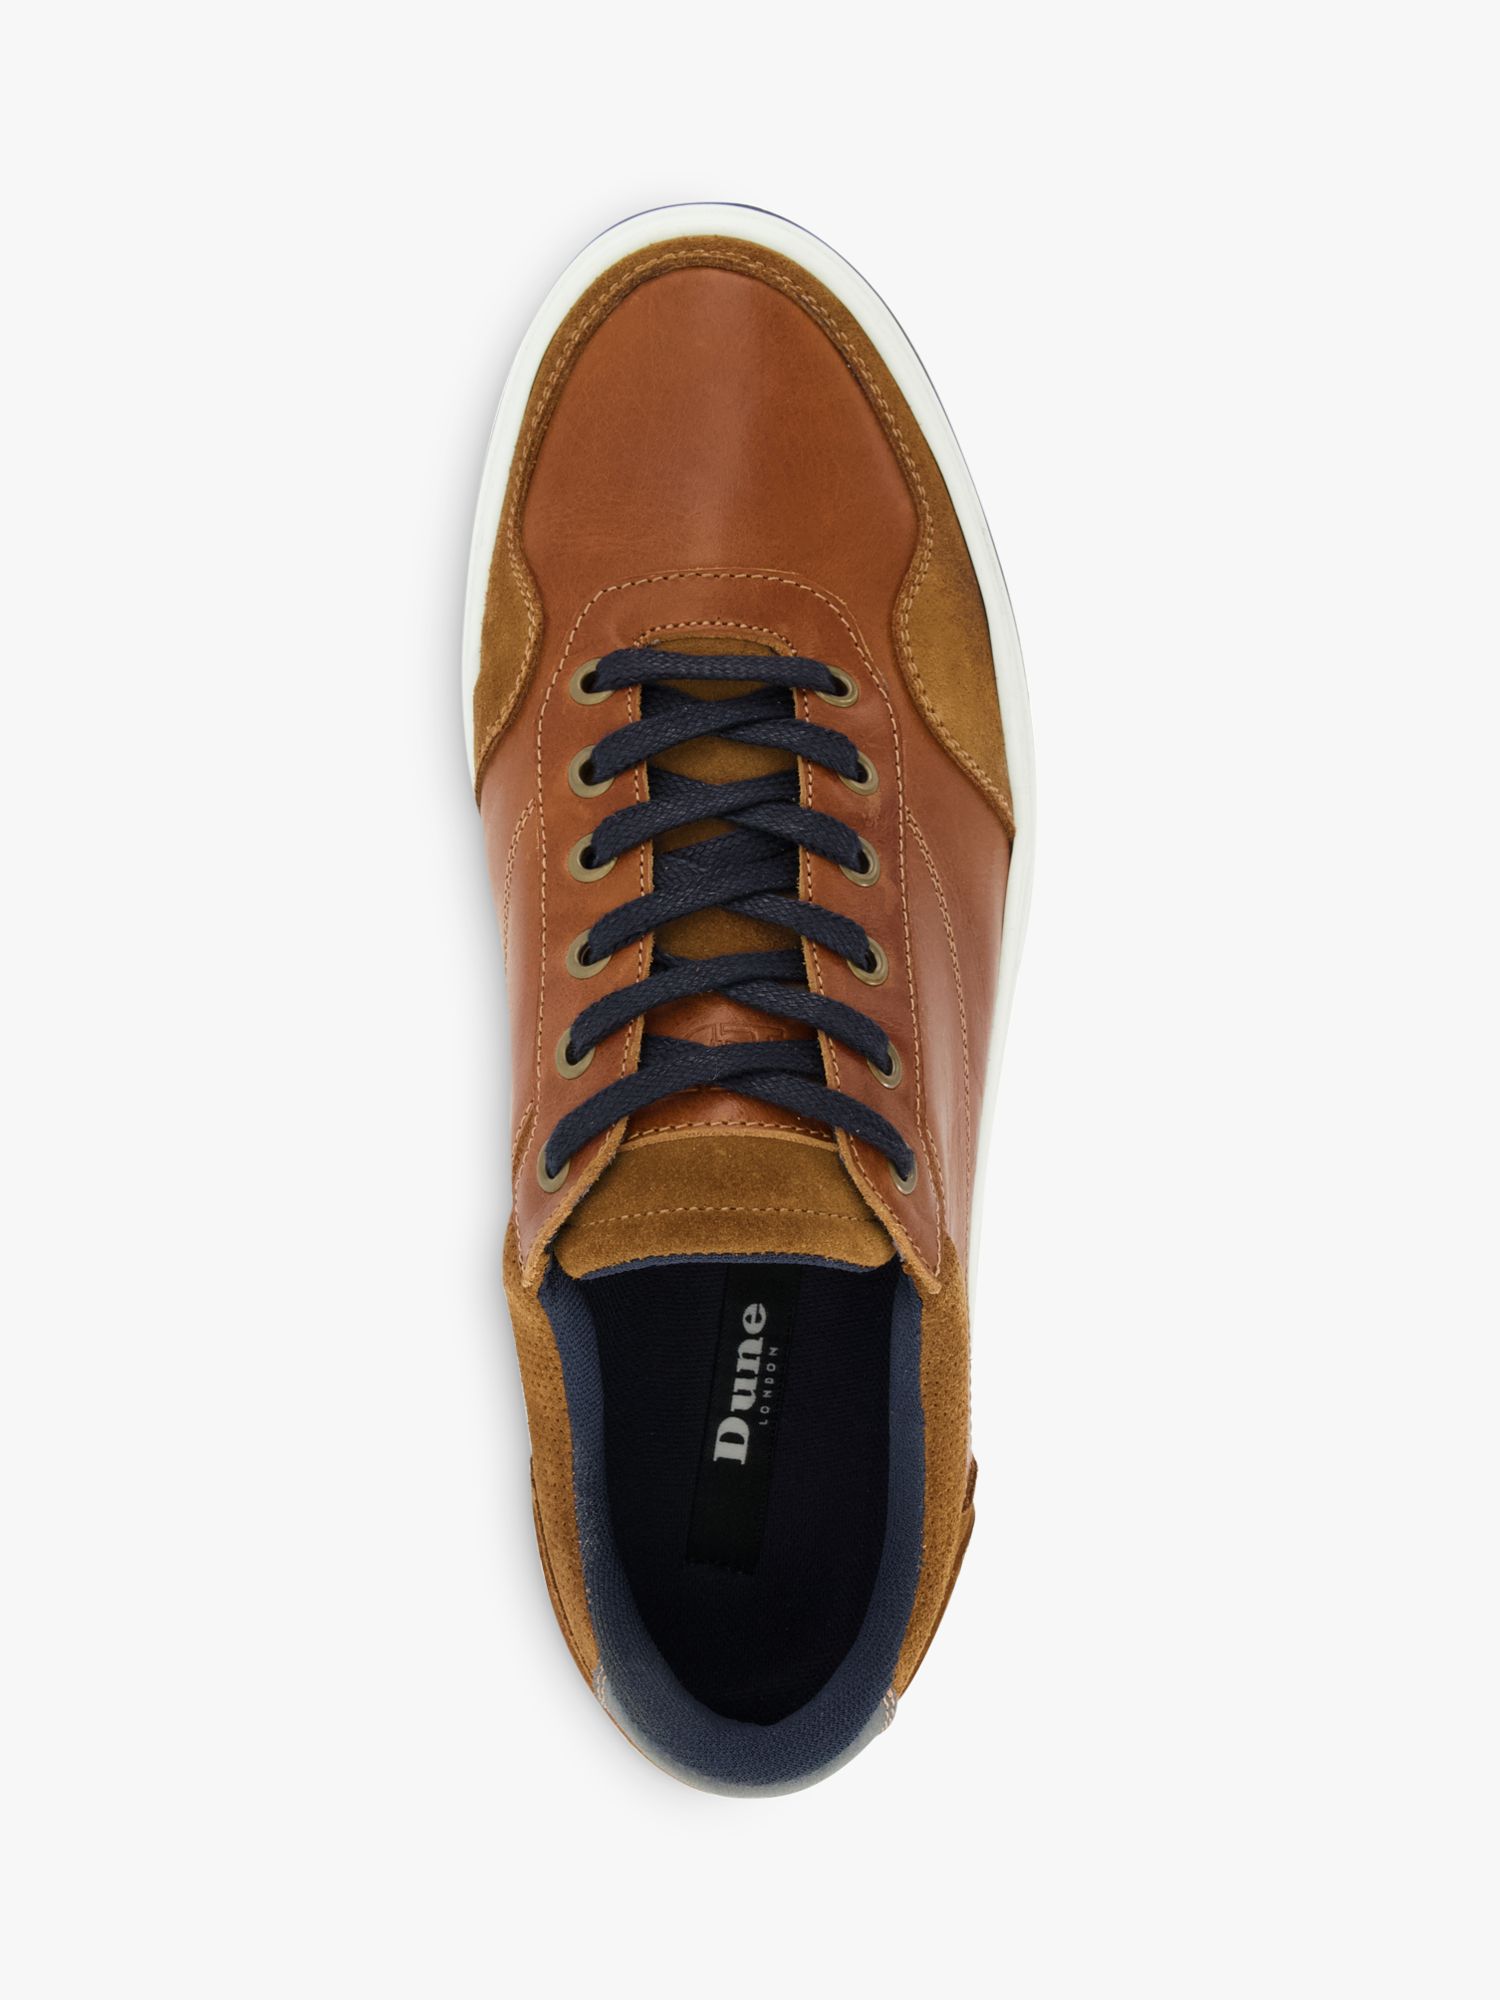 Buy Dune Thorin Leather Lace Up Trainers Online at johnlewis.com